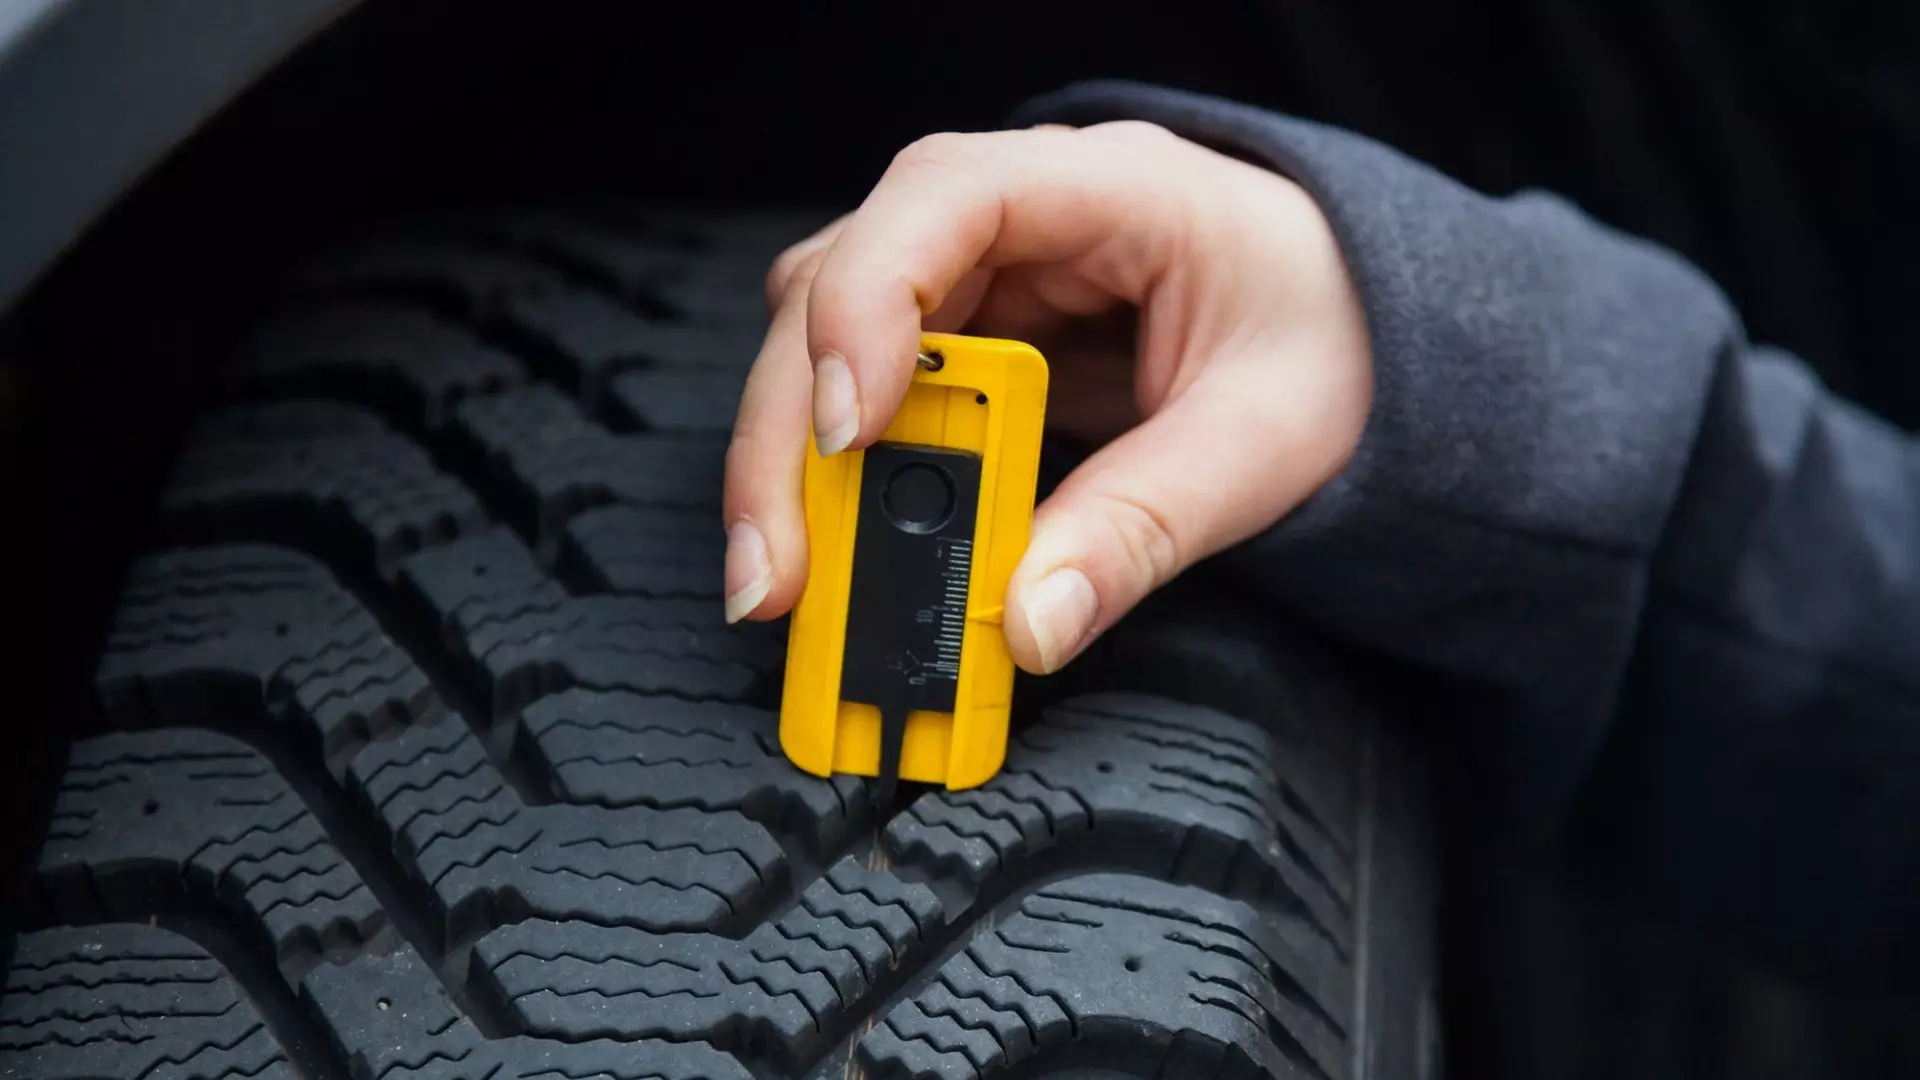 How To Check Tire Tread by Yourself | Autance